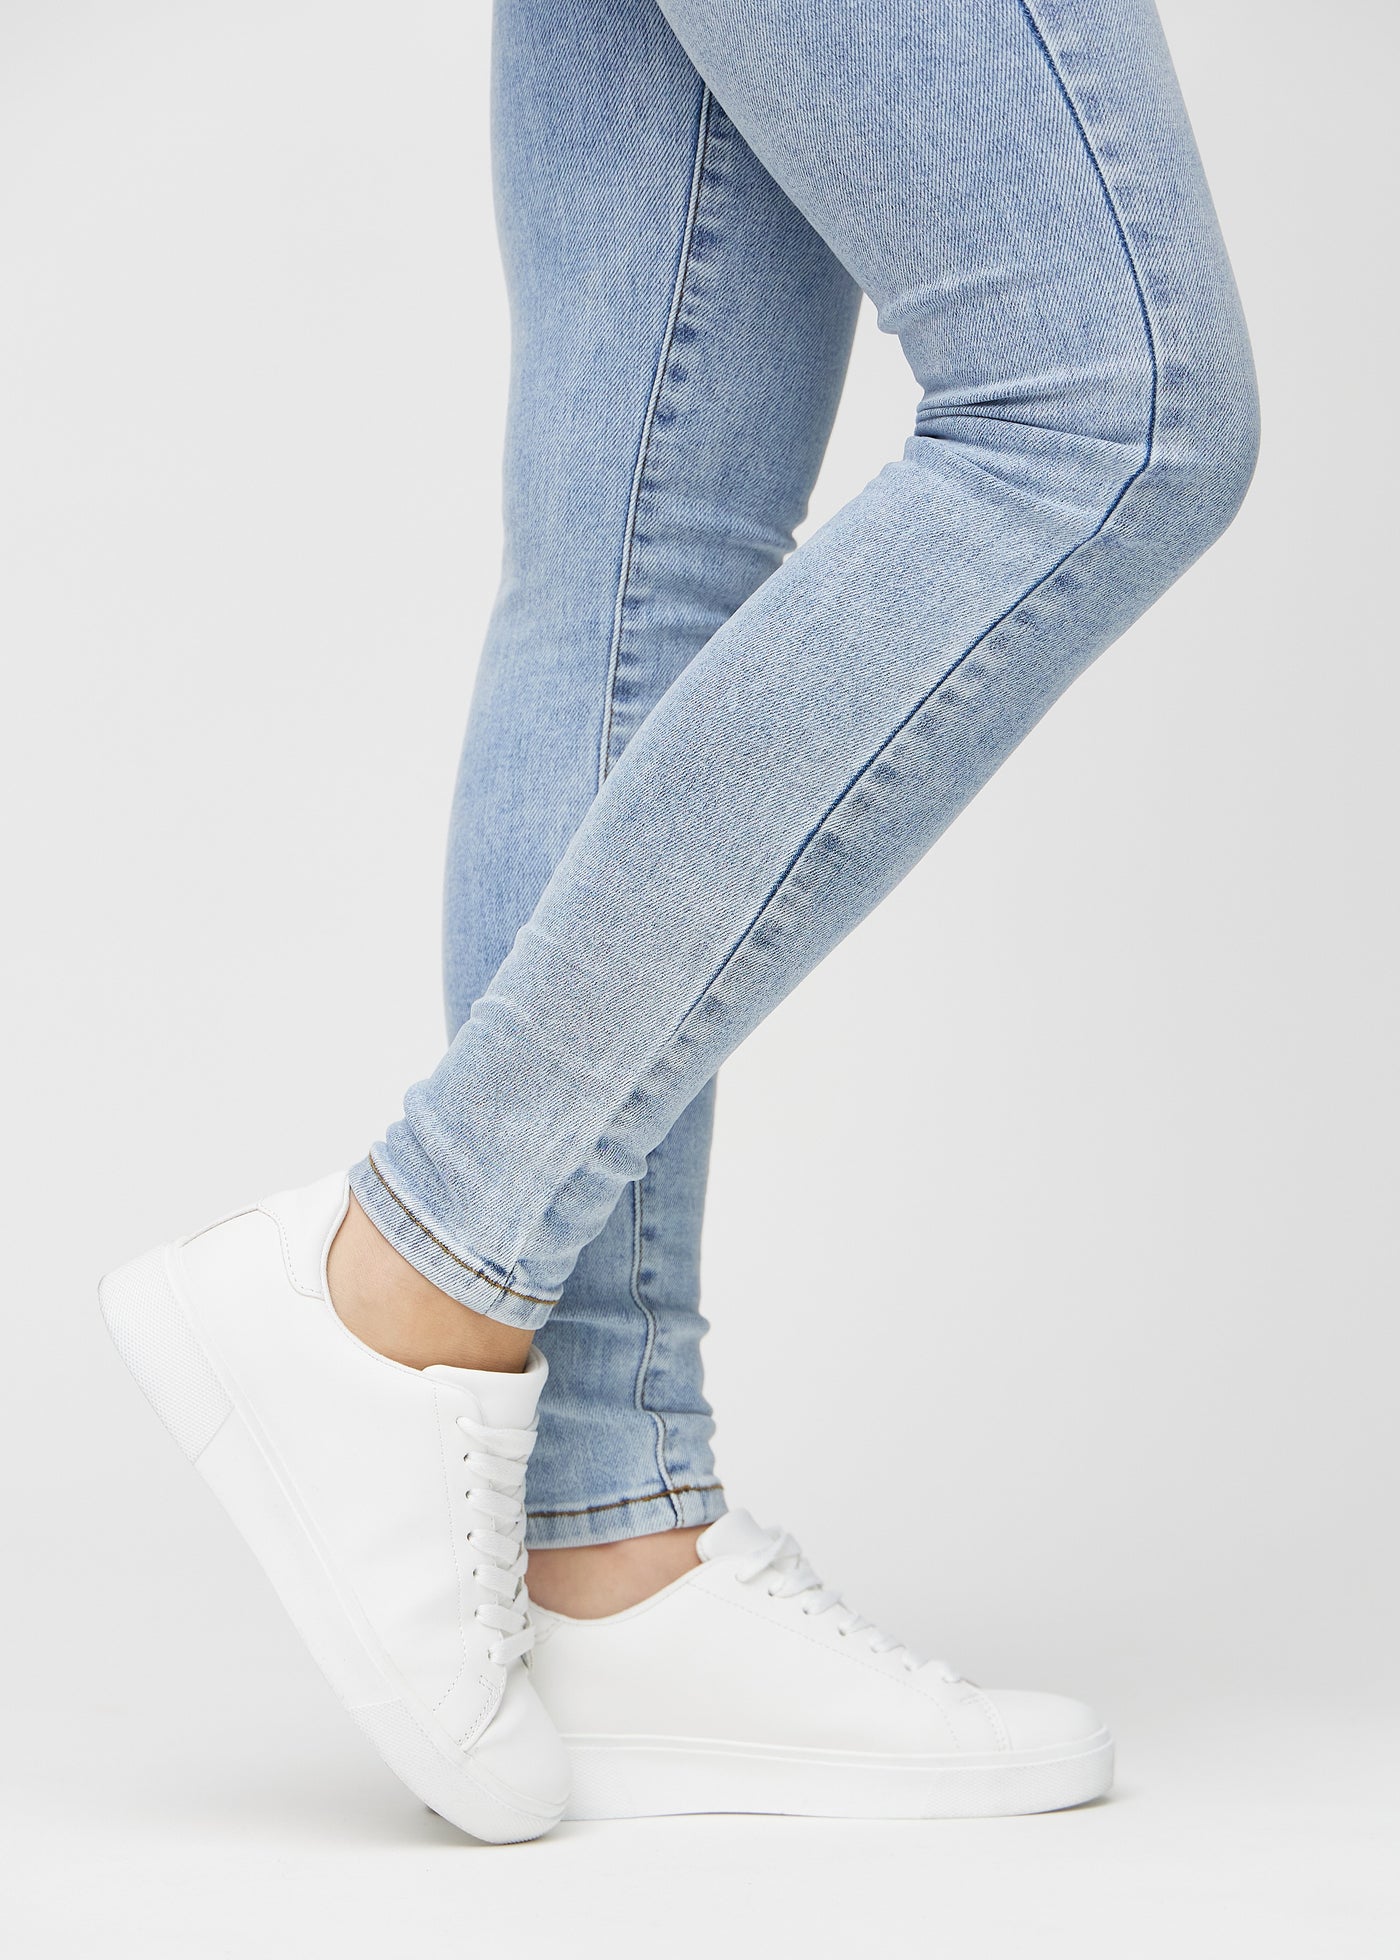 Perfect Jeans - Skinny - Waves™